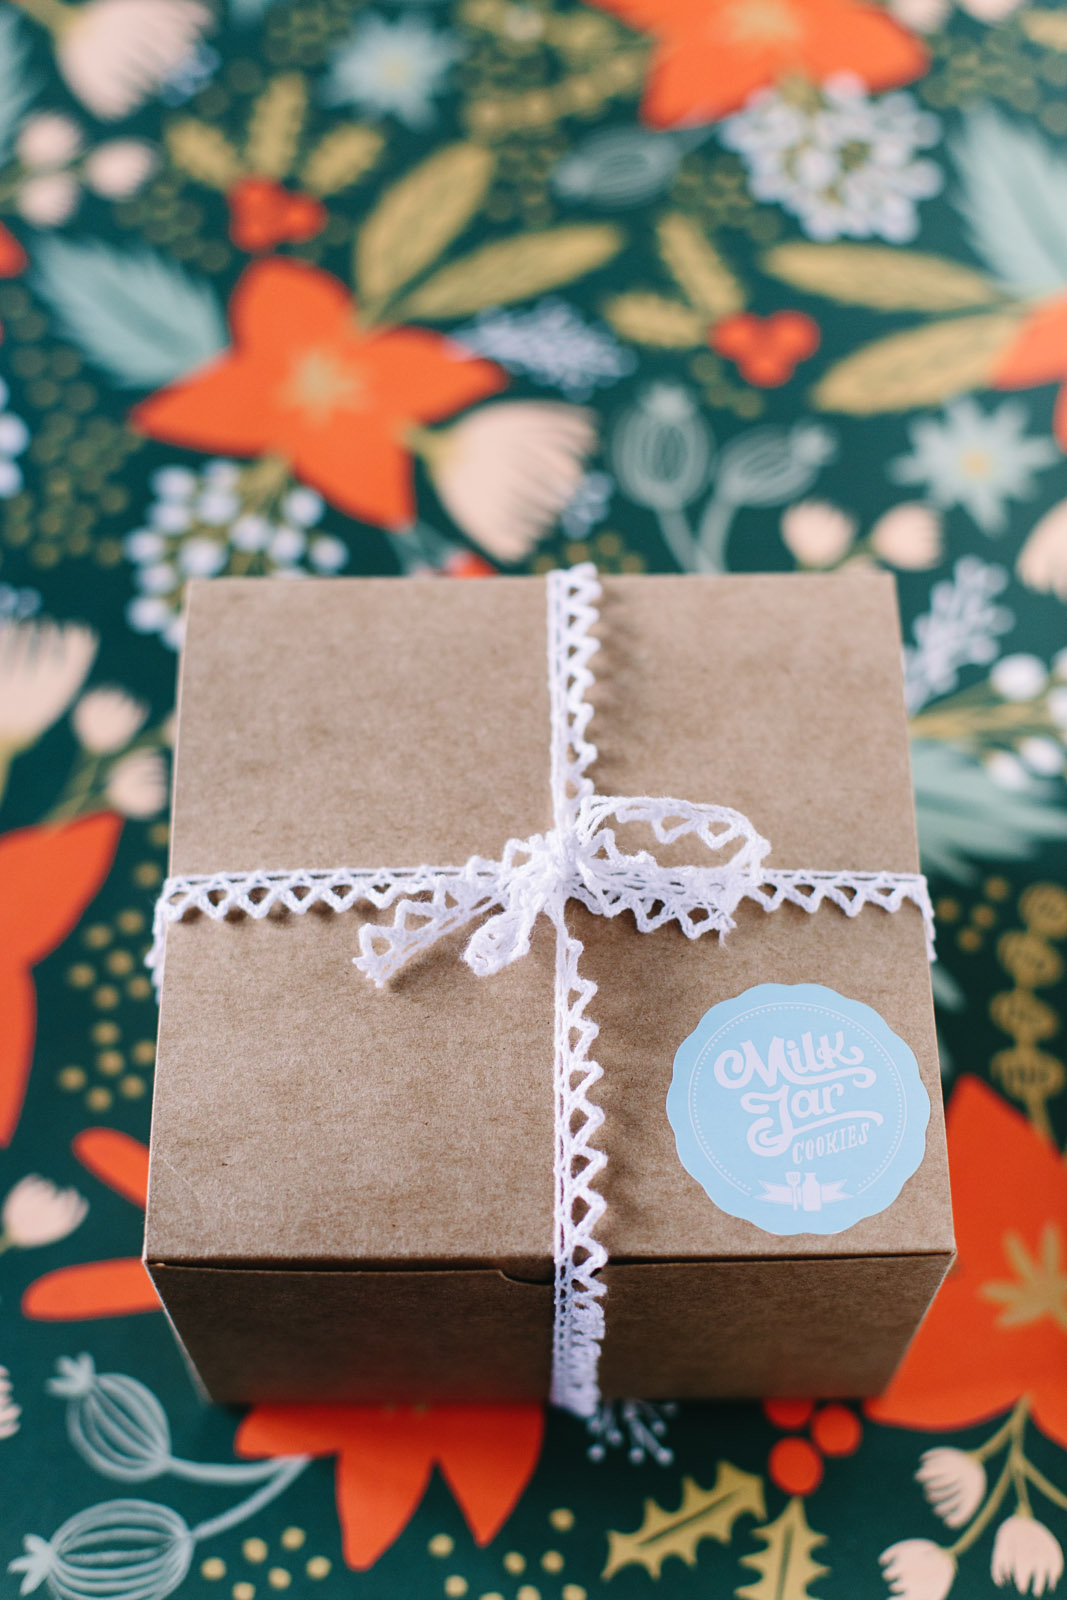 Photos by Mary Costa for Garlic My Soul | Milk Jar Cookies Los Angeles | 007